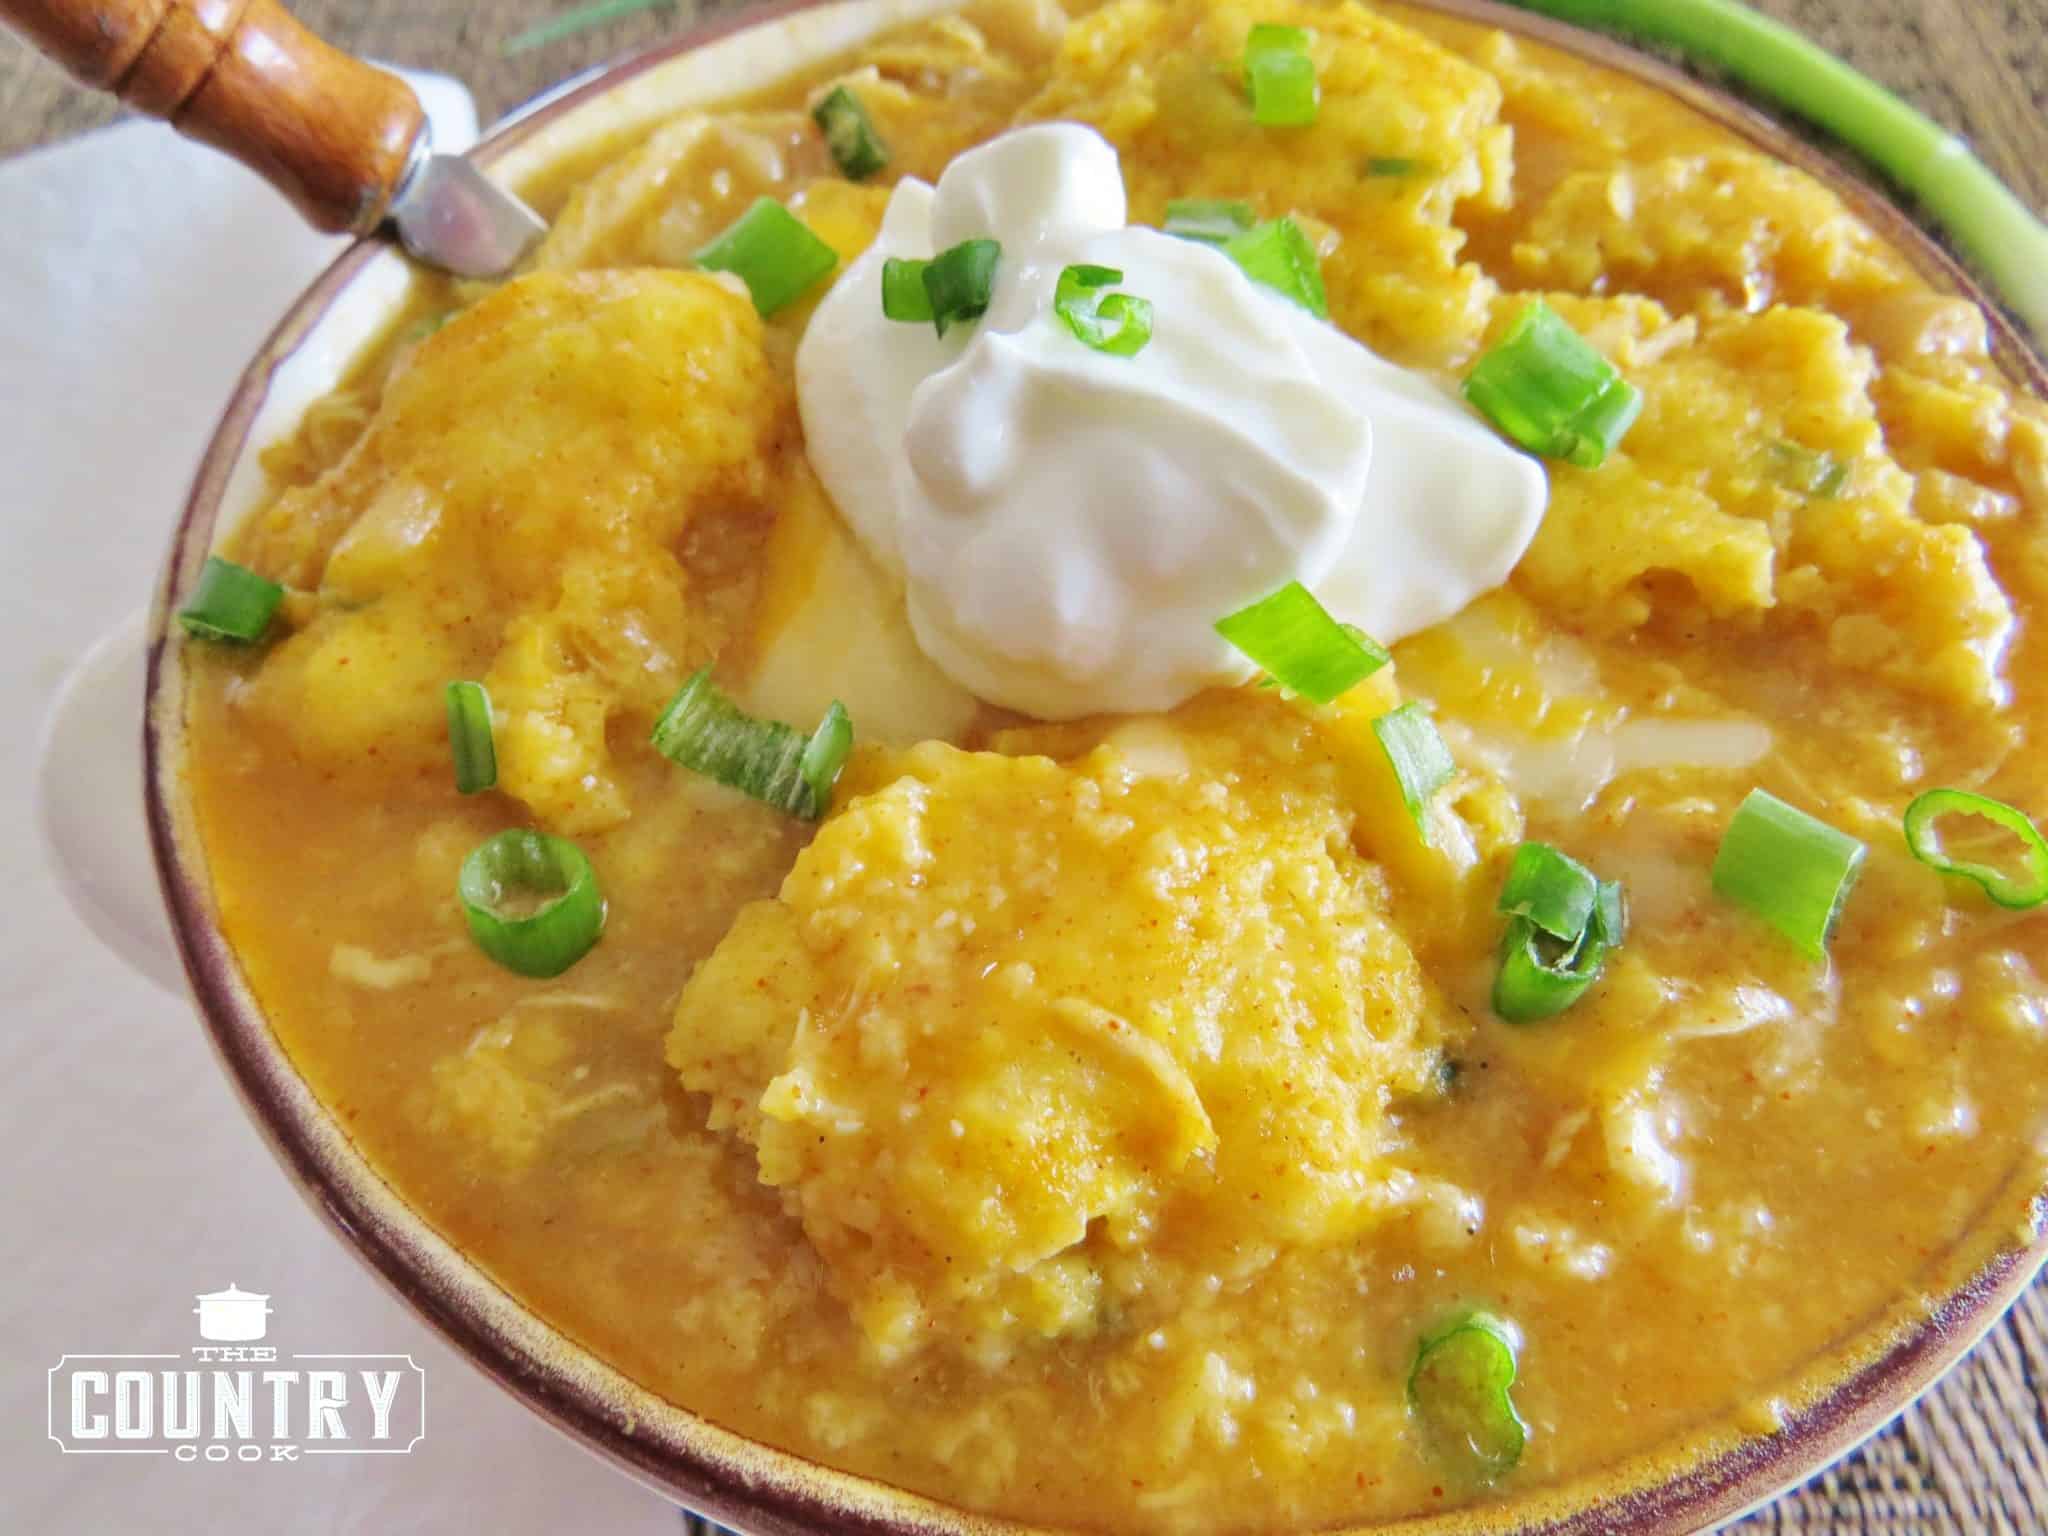 White Chicken Chili with Cornbread Dumplings shown in a bowl with a dollop of sour cream on top with sliced green onions.